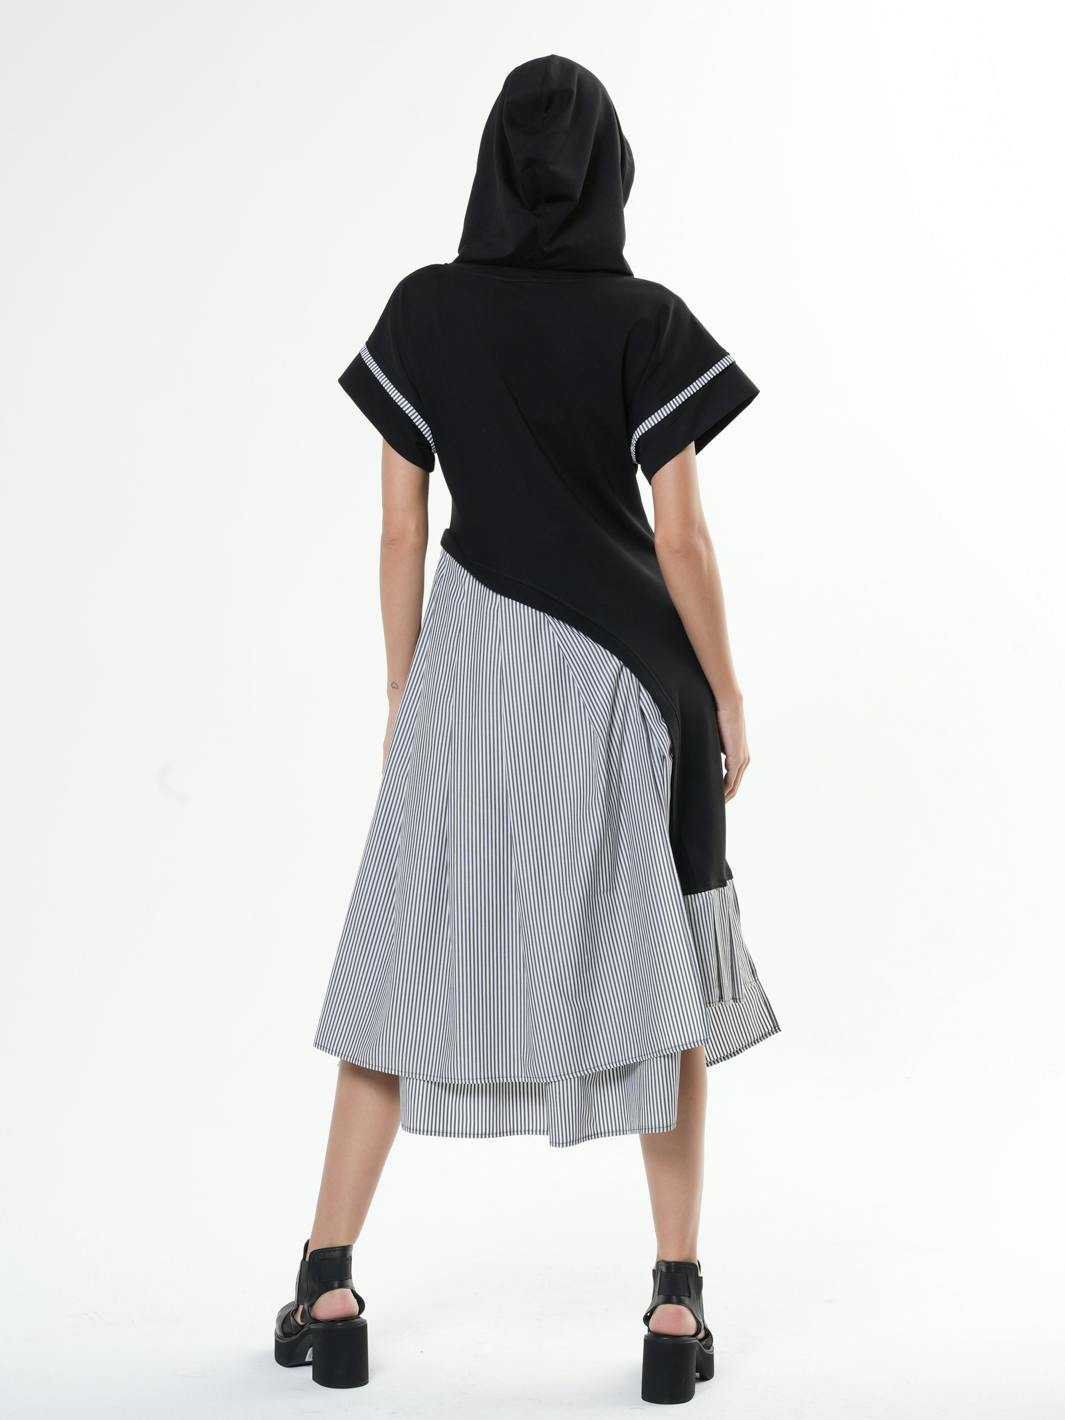 Thumbnail preview #5 for Asymmetric Hooded Dress With Short Sleeves 